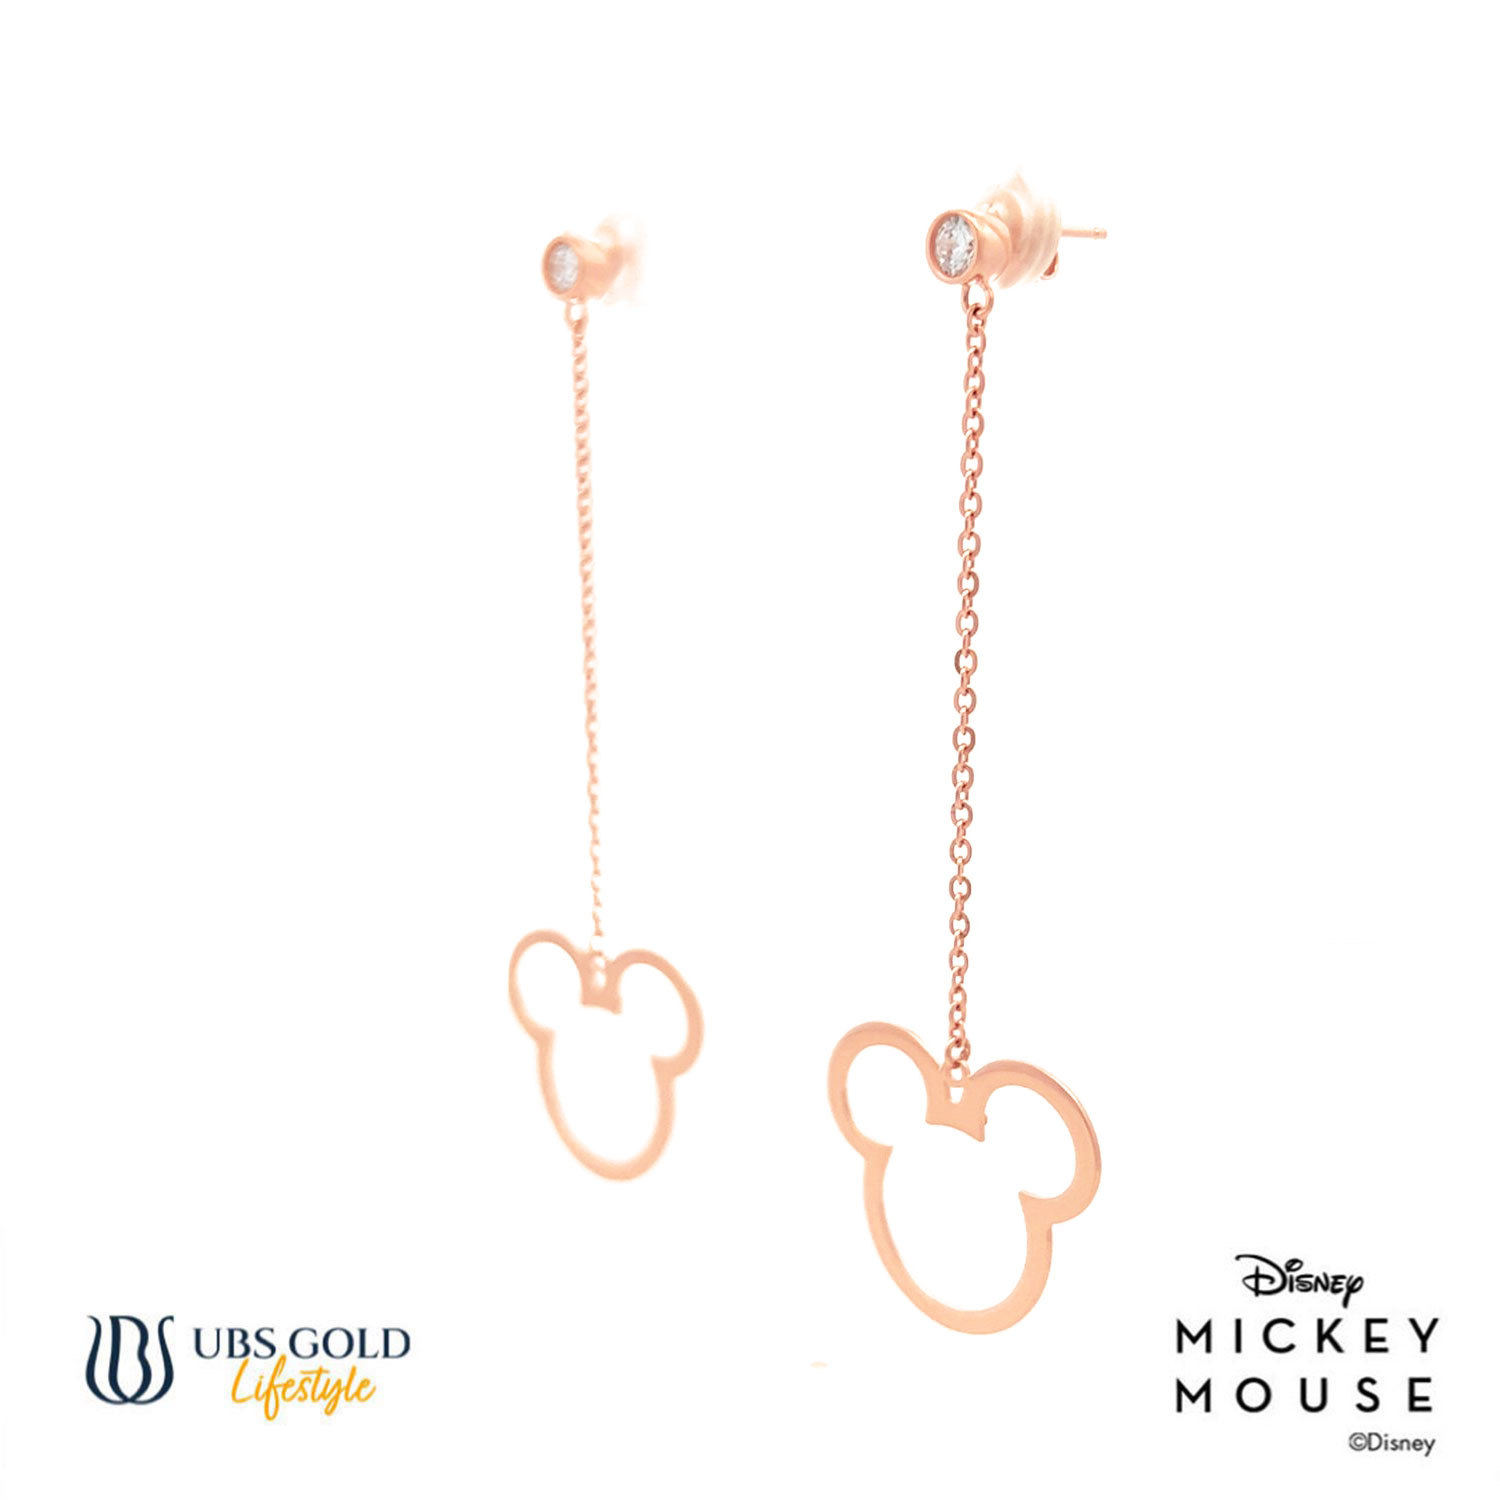 UBS Gold Anting Emas Disney Mickey Mouse - Ewy0001 - 17K